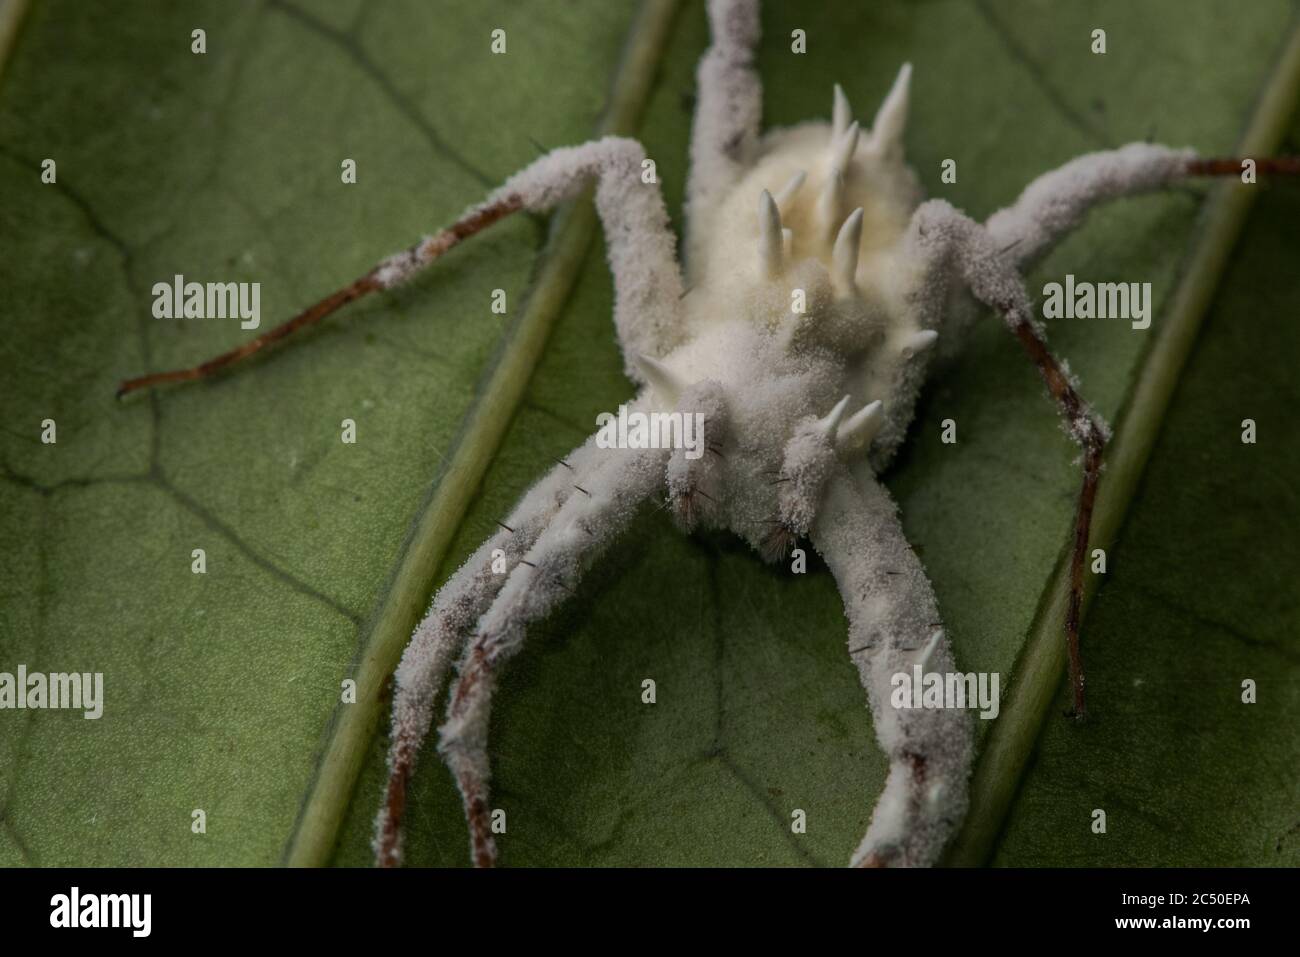 A spider that was taken over and killed by a parasitic fungus in the Amazon rainforest. Stock Photo